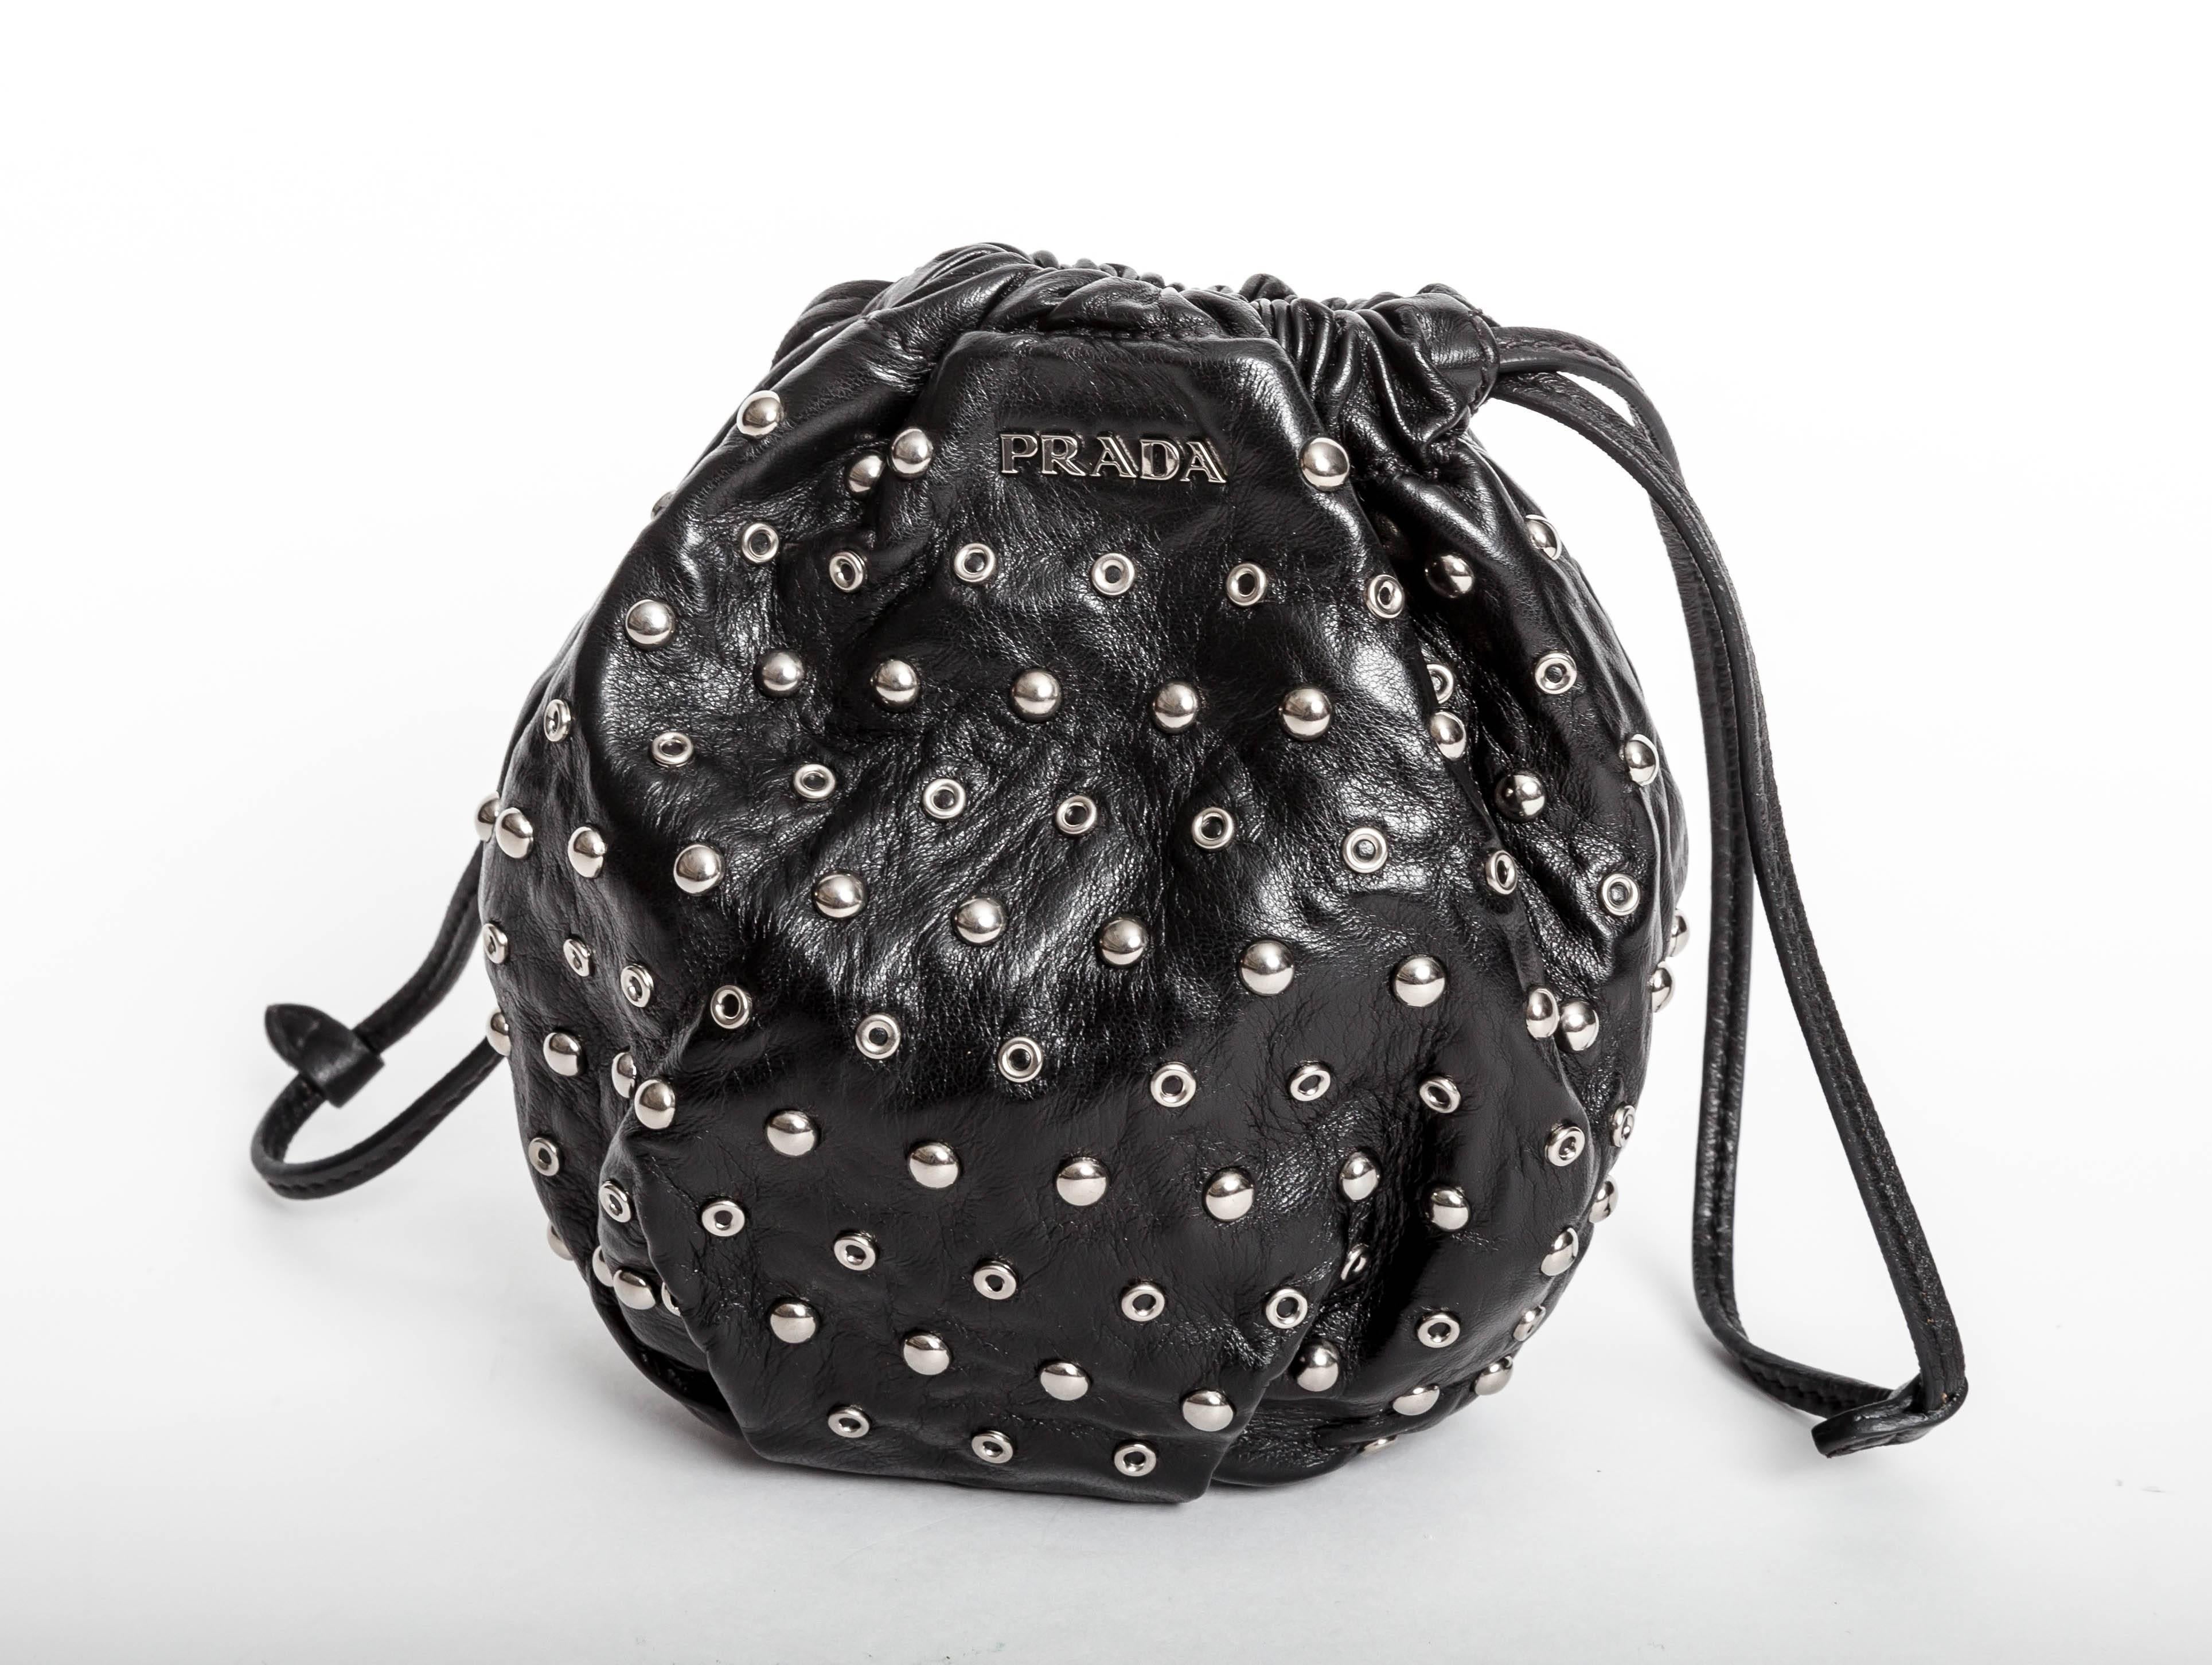 Adorable Drawstring Prada Nappa Leather Bag with Studs and Grommets.
May be carried as a wristlet 
Condition is immaculate.